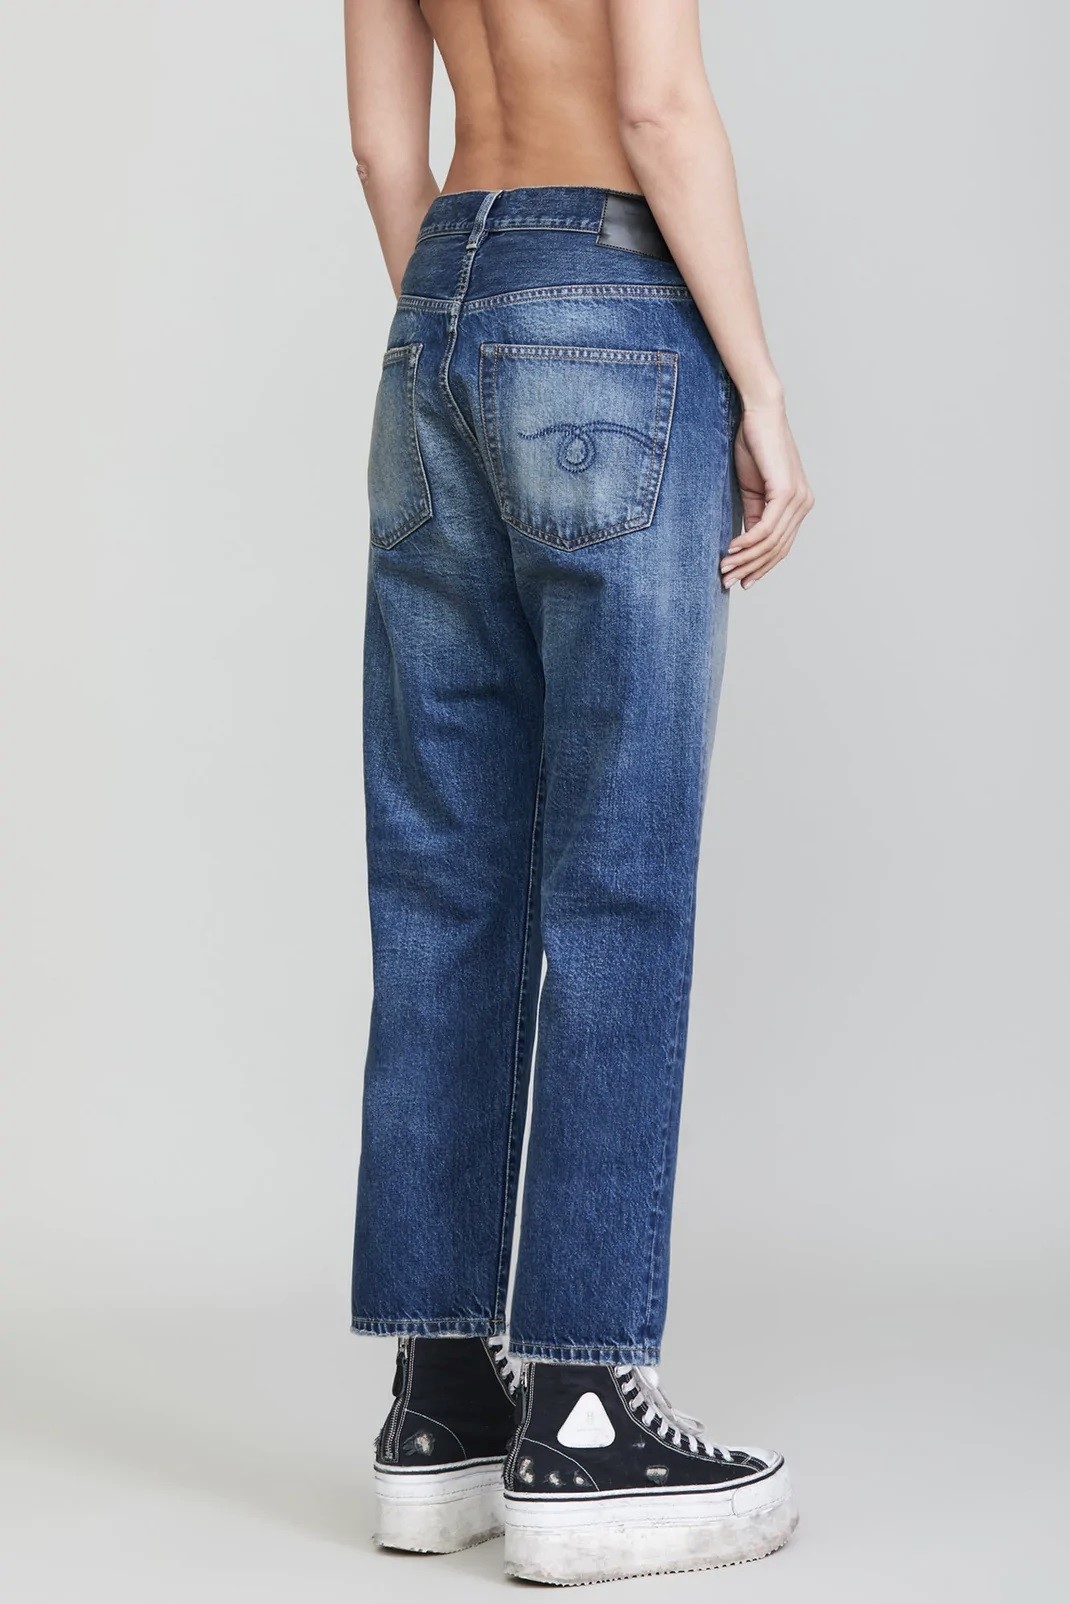 R13 Tailored Drop Jeans in Kyle Washing 26